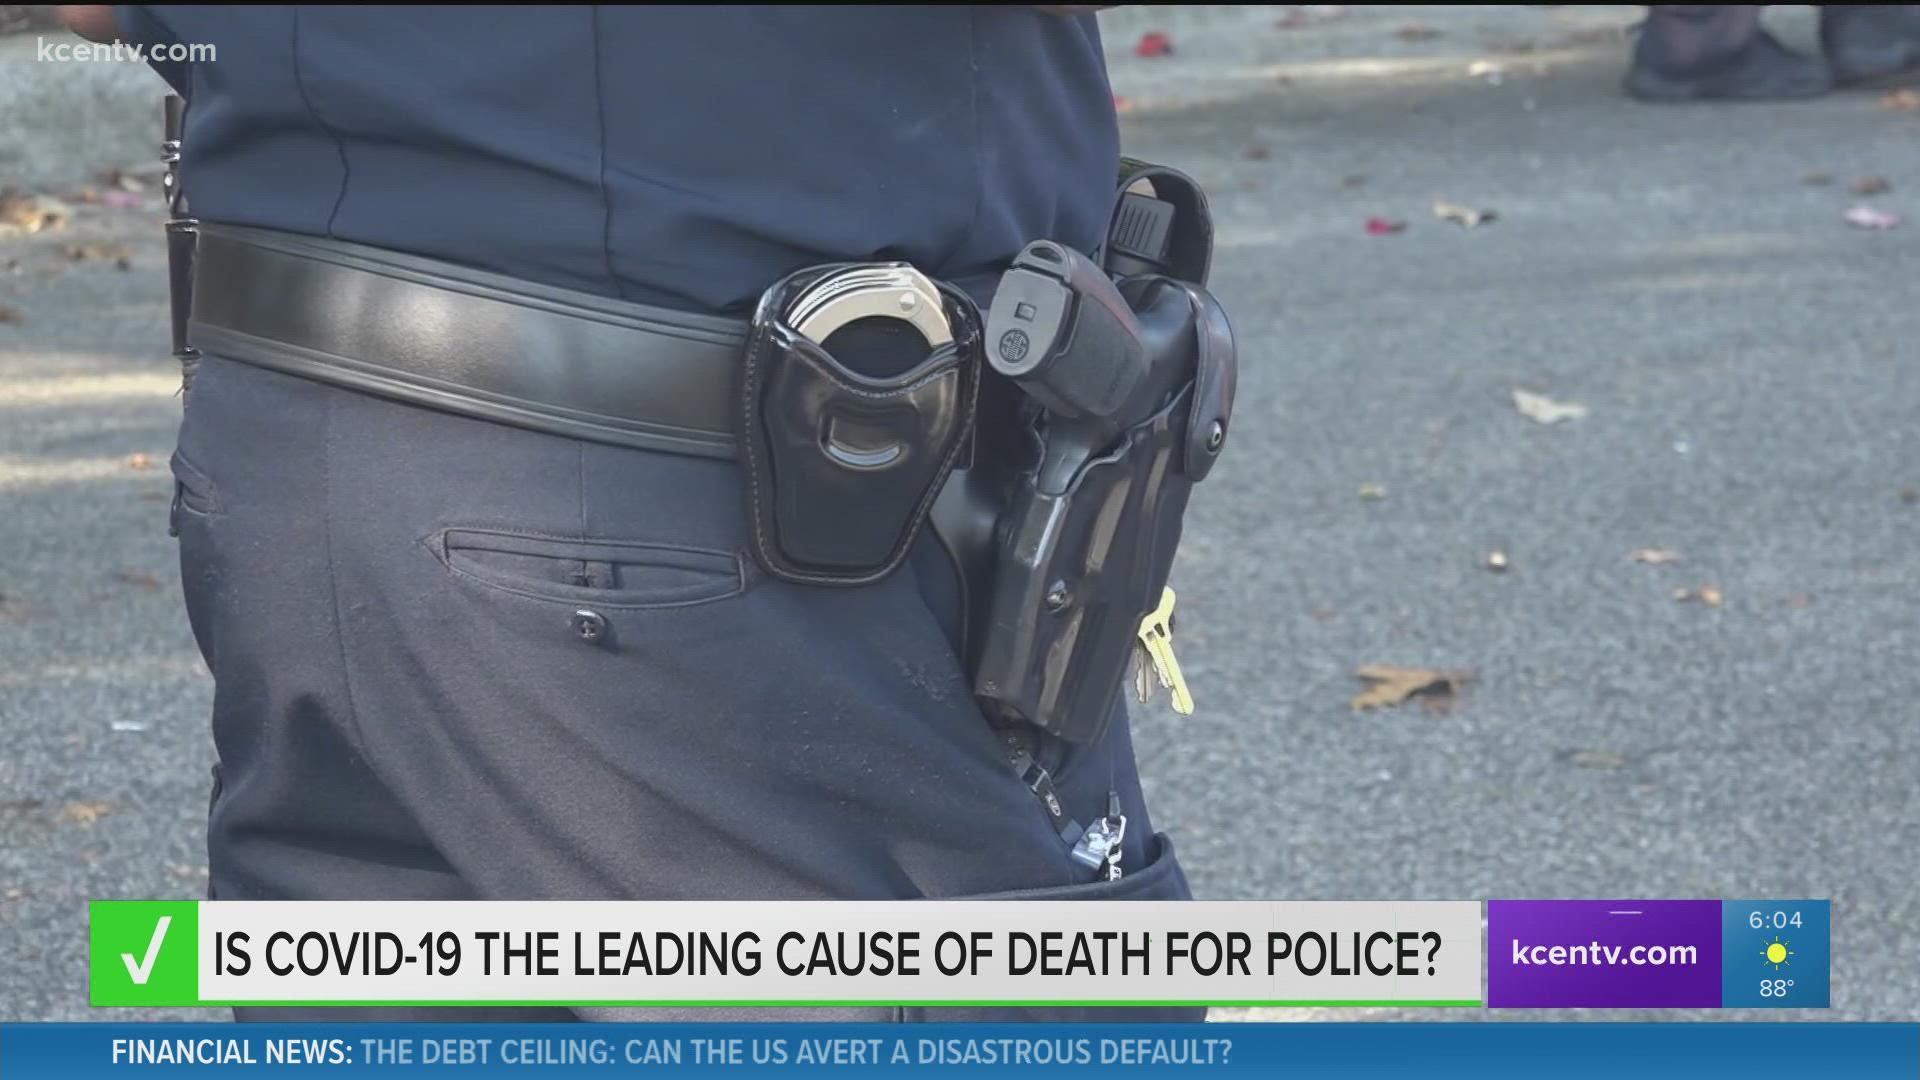 The virus has been the leading cause of death for on-duty law enforcement officers this year.